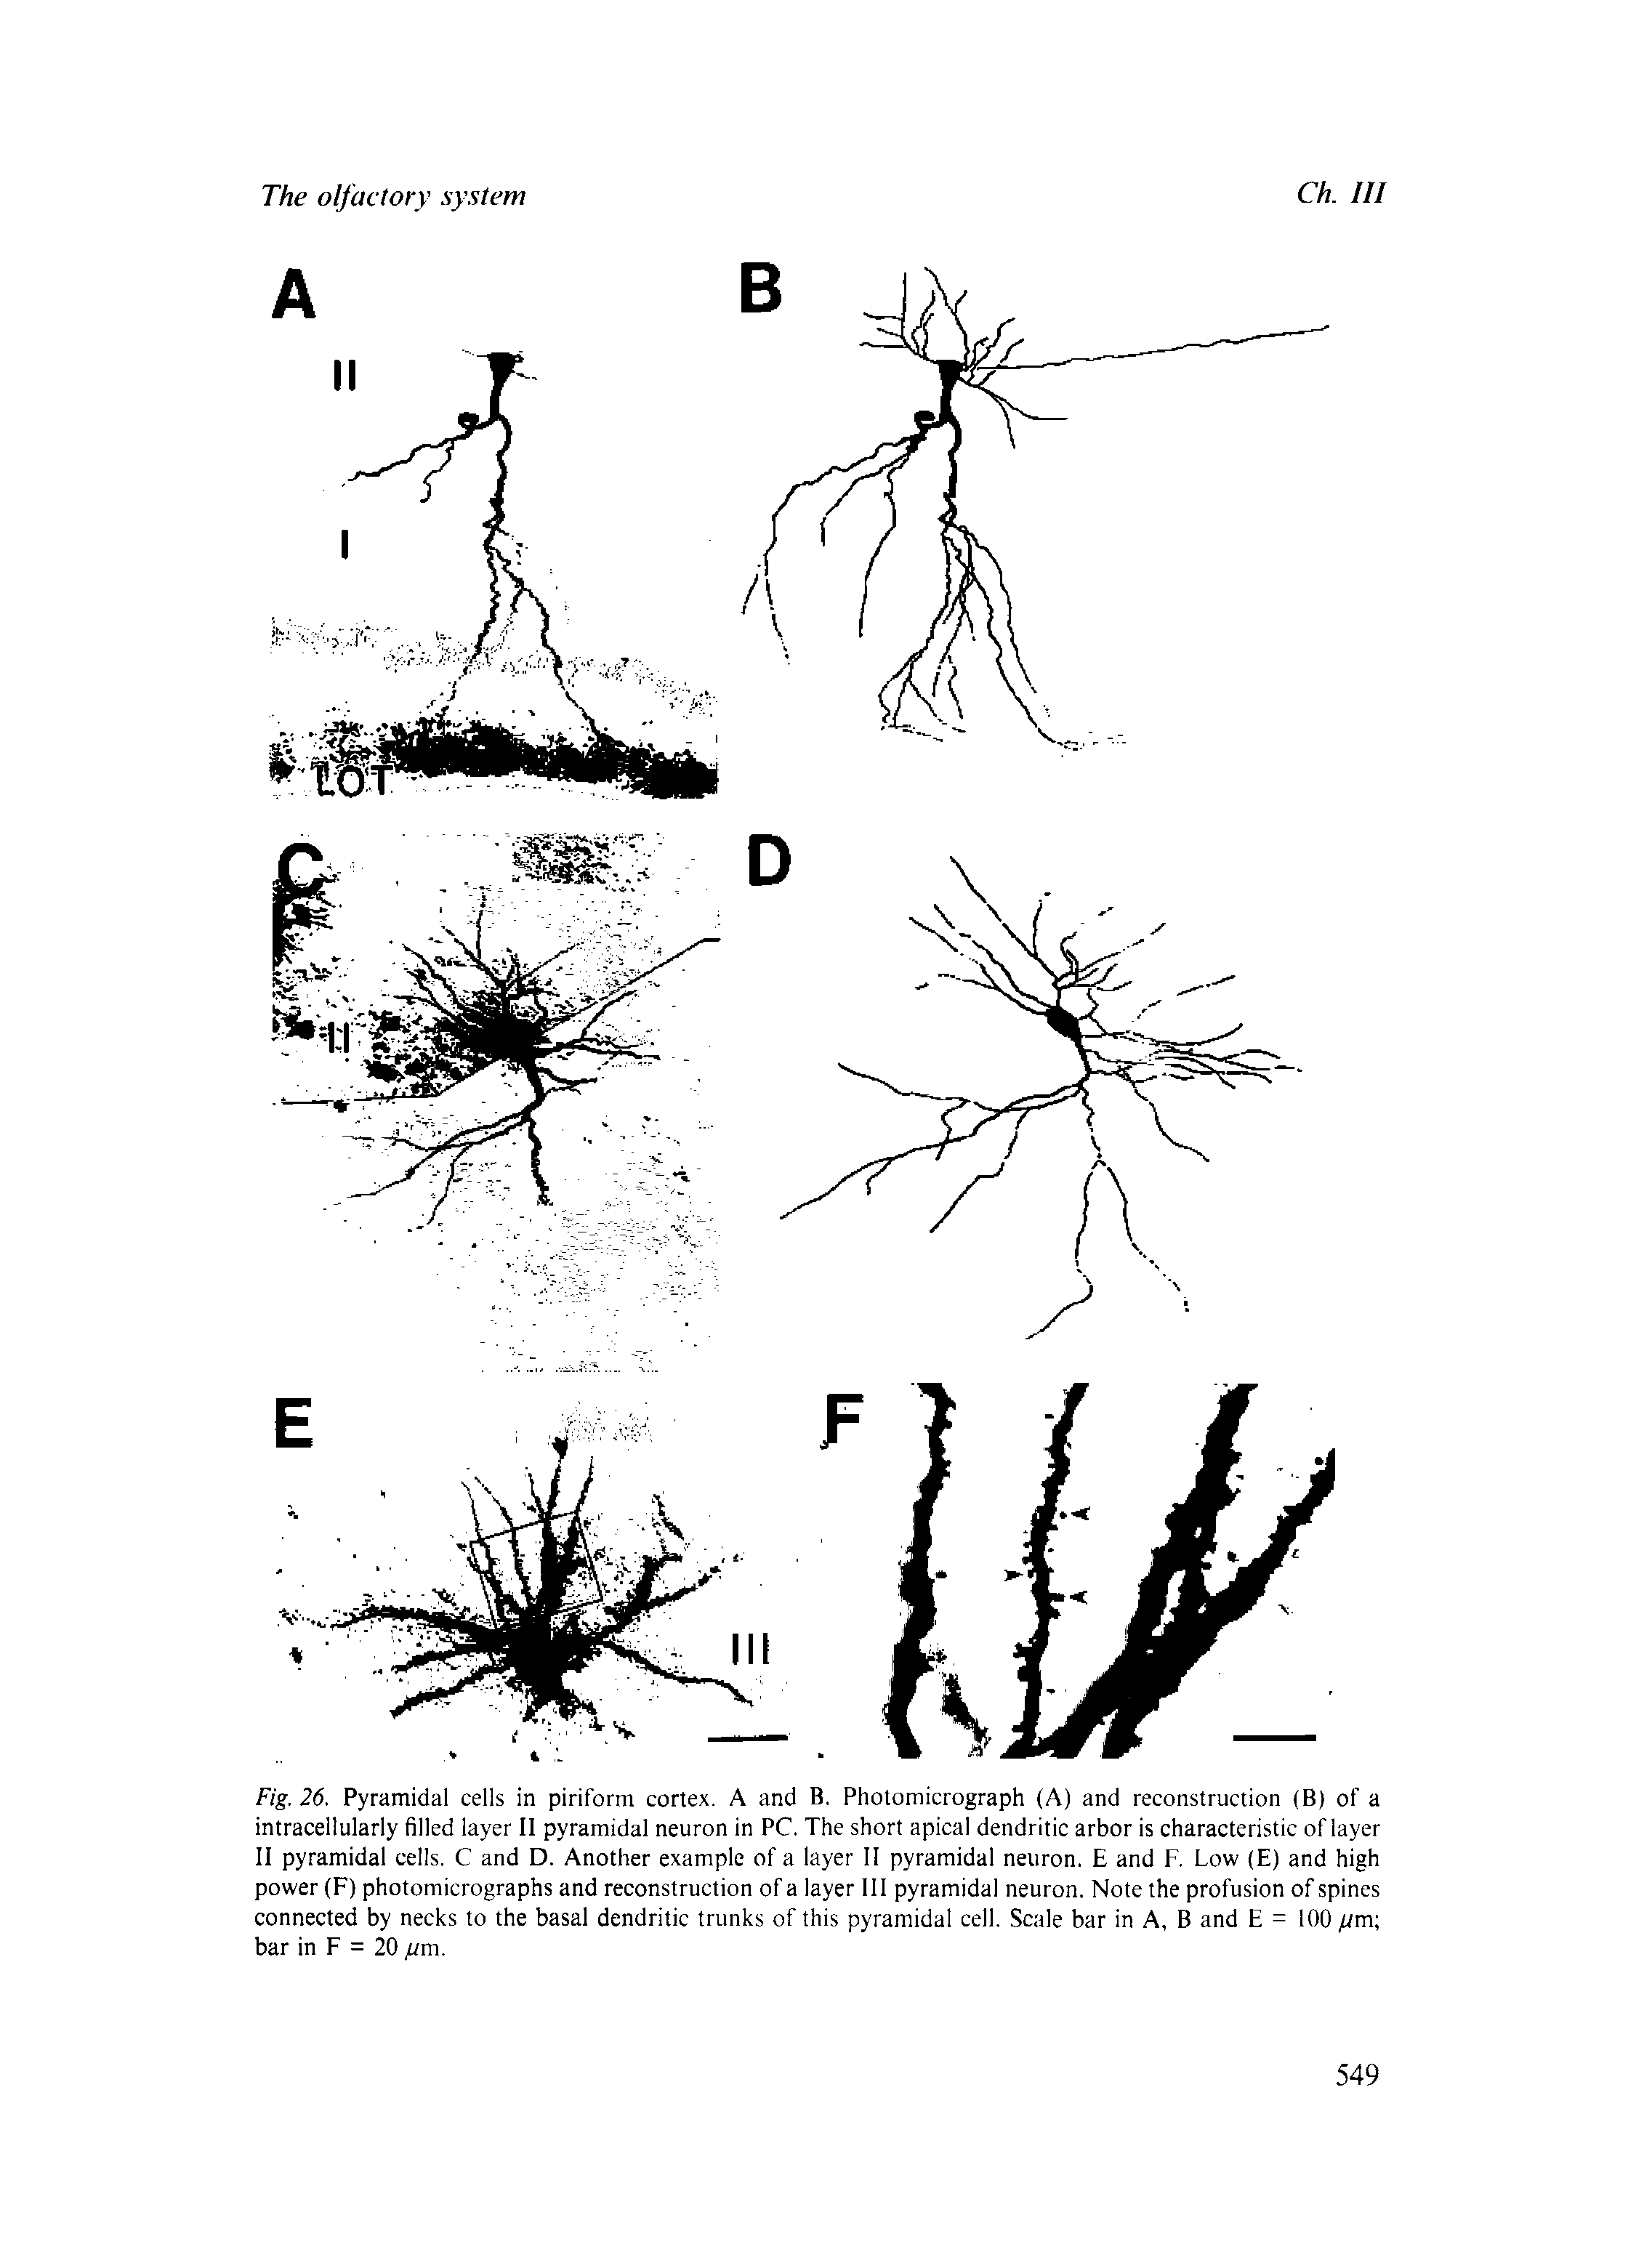 Fig. 26. Pyramidal cells in piriform cortex. A and B, Photomicrograph (A) and reconstruction (B) of a intracellularly filled layer II pyramidal neuron In PC. The short apical dendritic arbor is characteristic of layer 11 pyramidal cells. C and D. Another example of a layer II pyramidal neuron. E and F. Low (E) and high power (F) photomicrographs and reconstruction of a layer III pyramidal neuron. Note the profusion of spines connected by necks to the basal dendritic trunks of this pyramidal cell. Scale bar in A, B and E = 100 /tm bar in F = 20 jum.